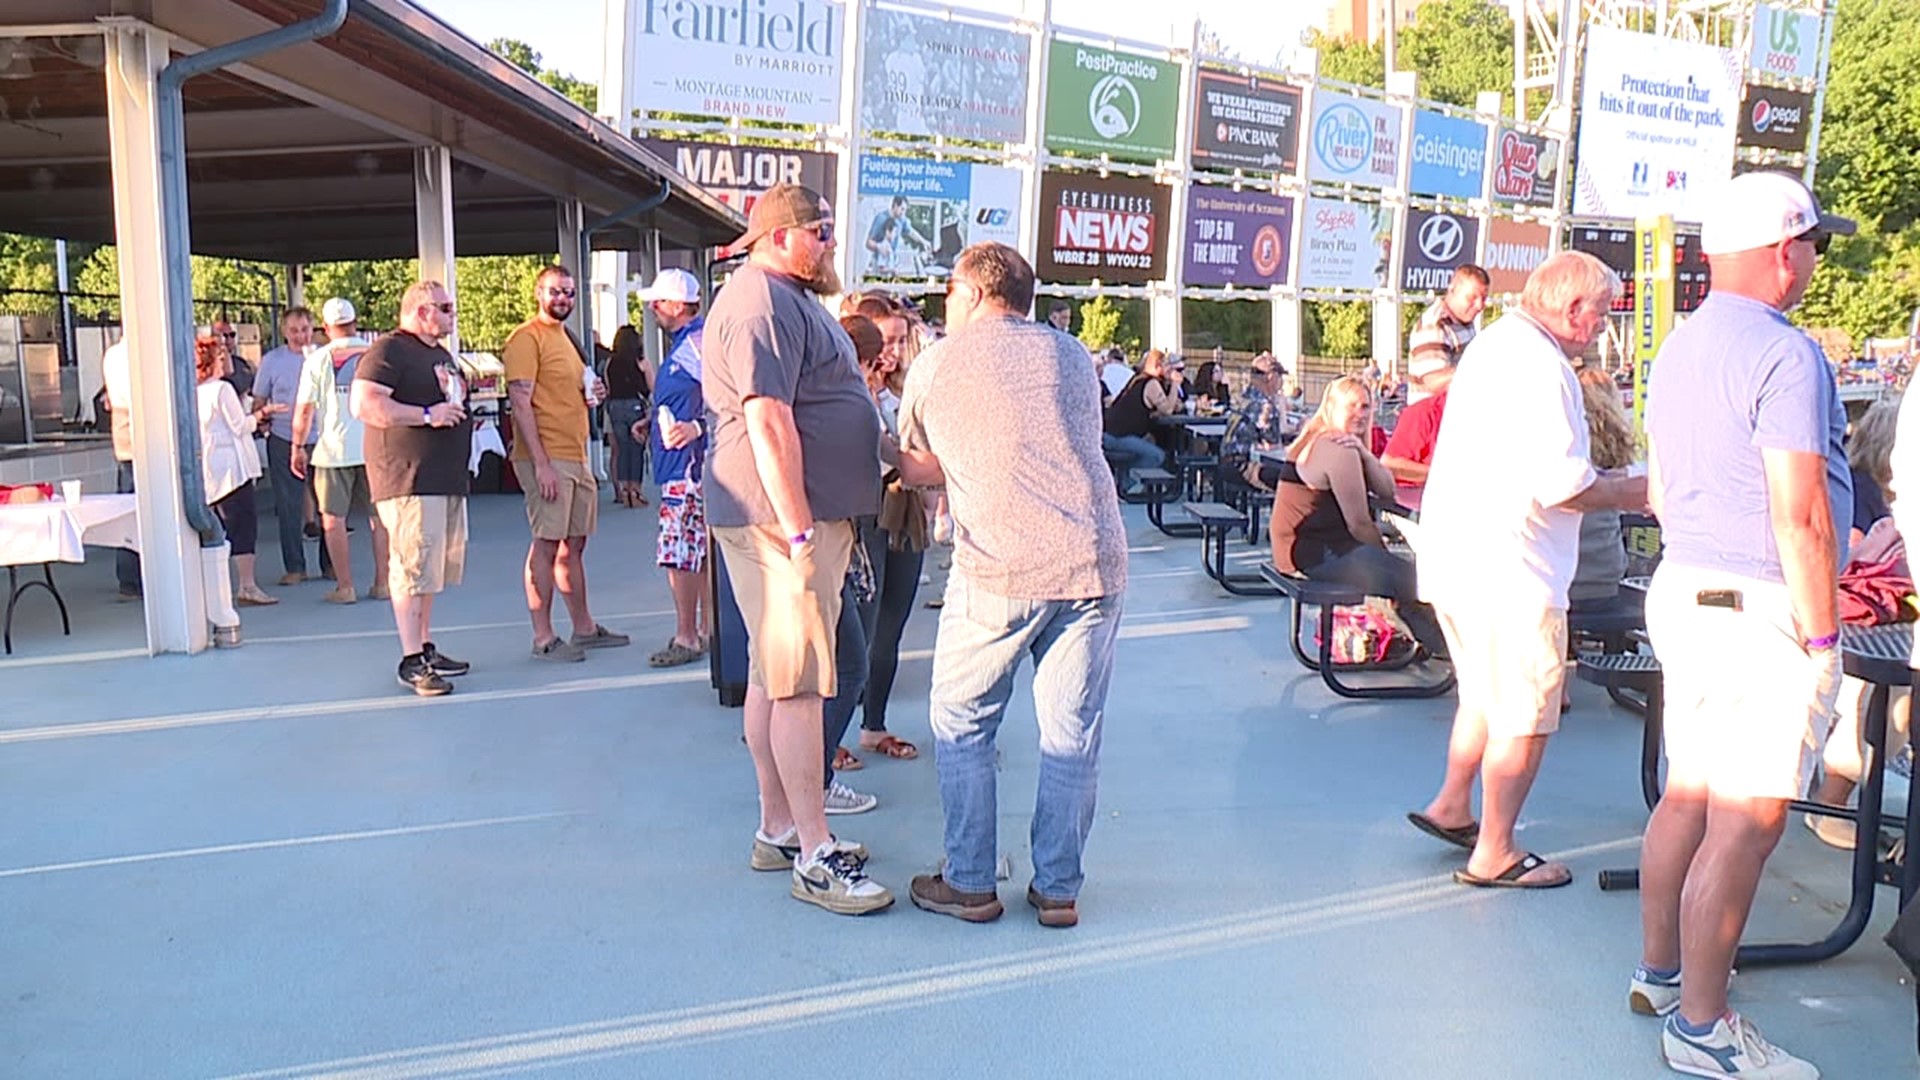 Teamsters Local 401 based in Wilkes-Barre celebrated its 100th anniversary Saturday with a celebration at the Scranton/Wilkes-Barre Railriders game at PNC Field.